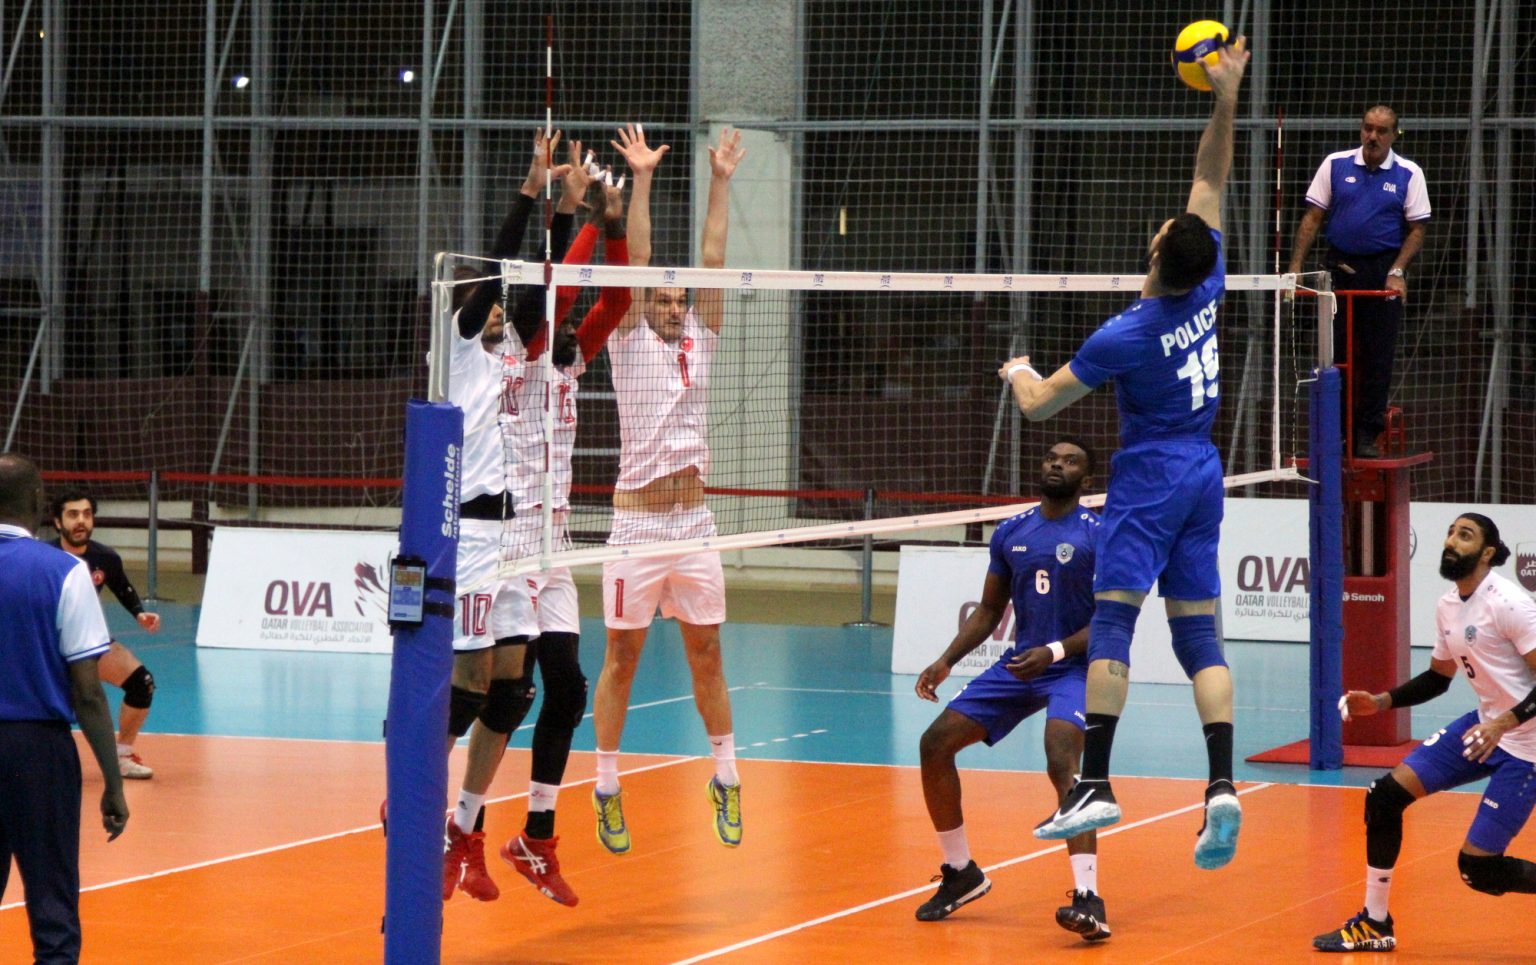 QATAR SENIOR MEN’S VOLLEYBALL LEAGUE CONCLUDED